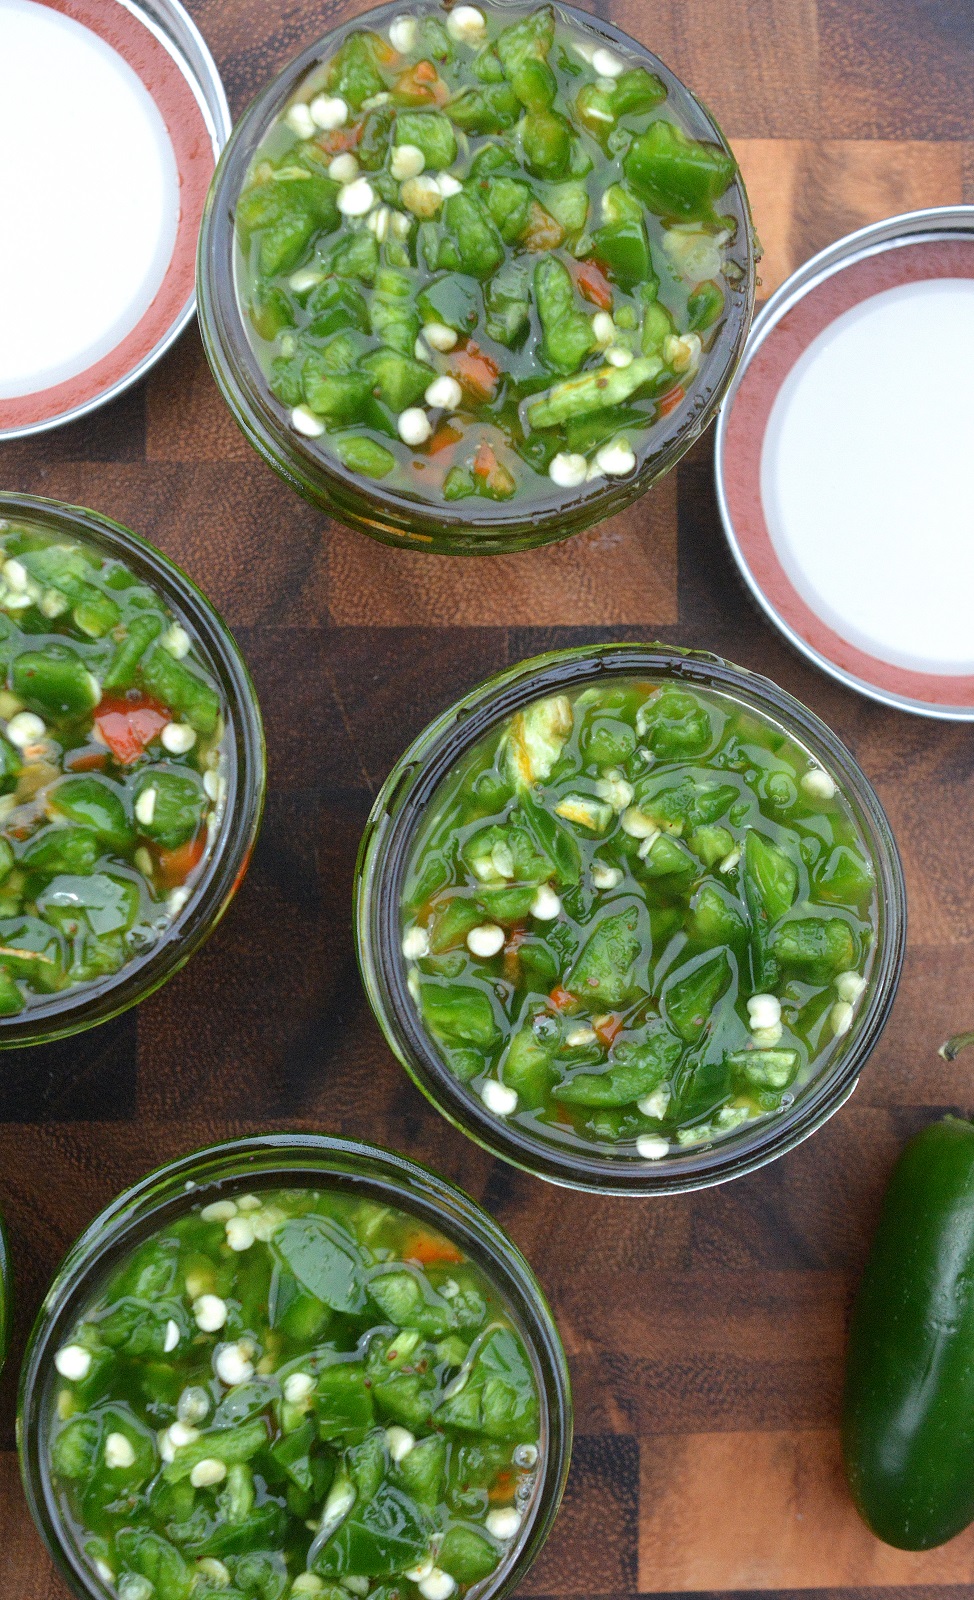 Jalapeno Relish made by quick pickling, ready overnight and lasts for weeks. 